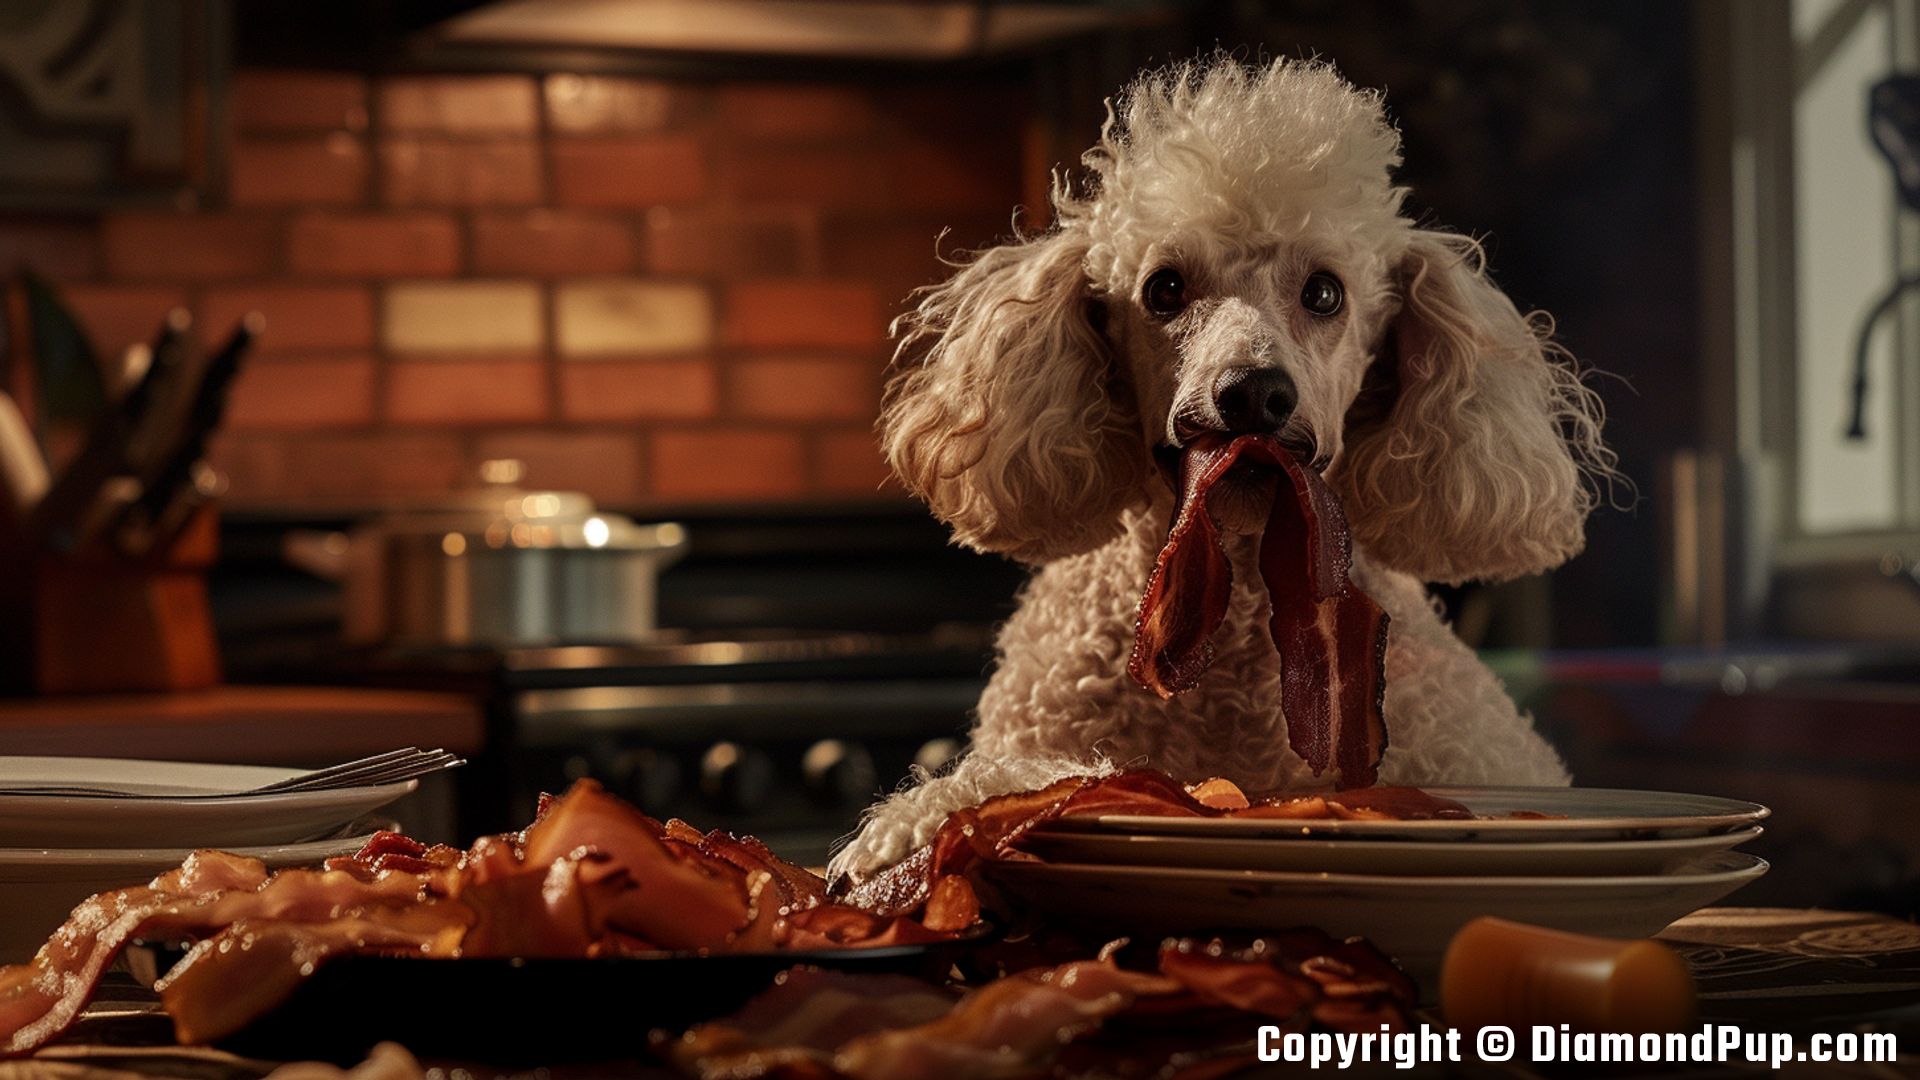 Image of an Adorable Poodle Eating Bacon